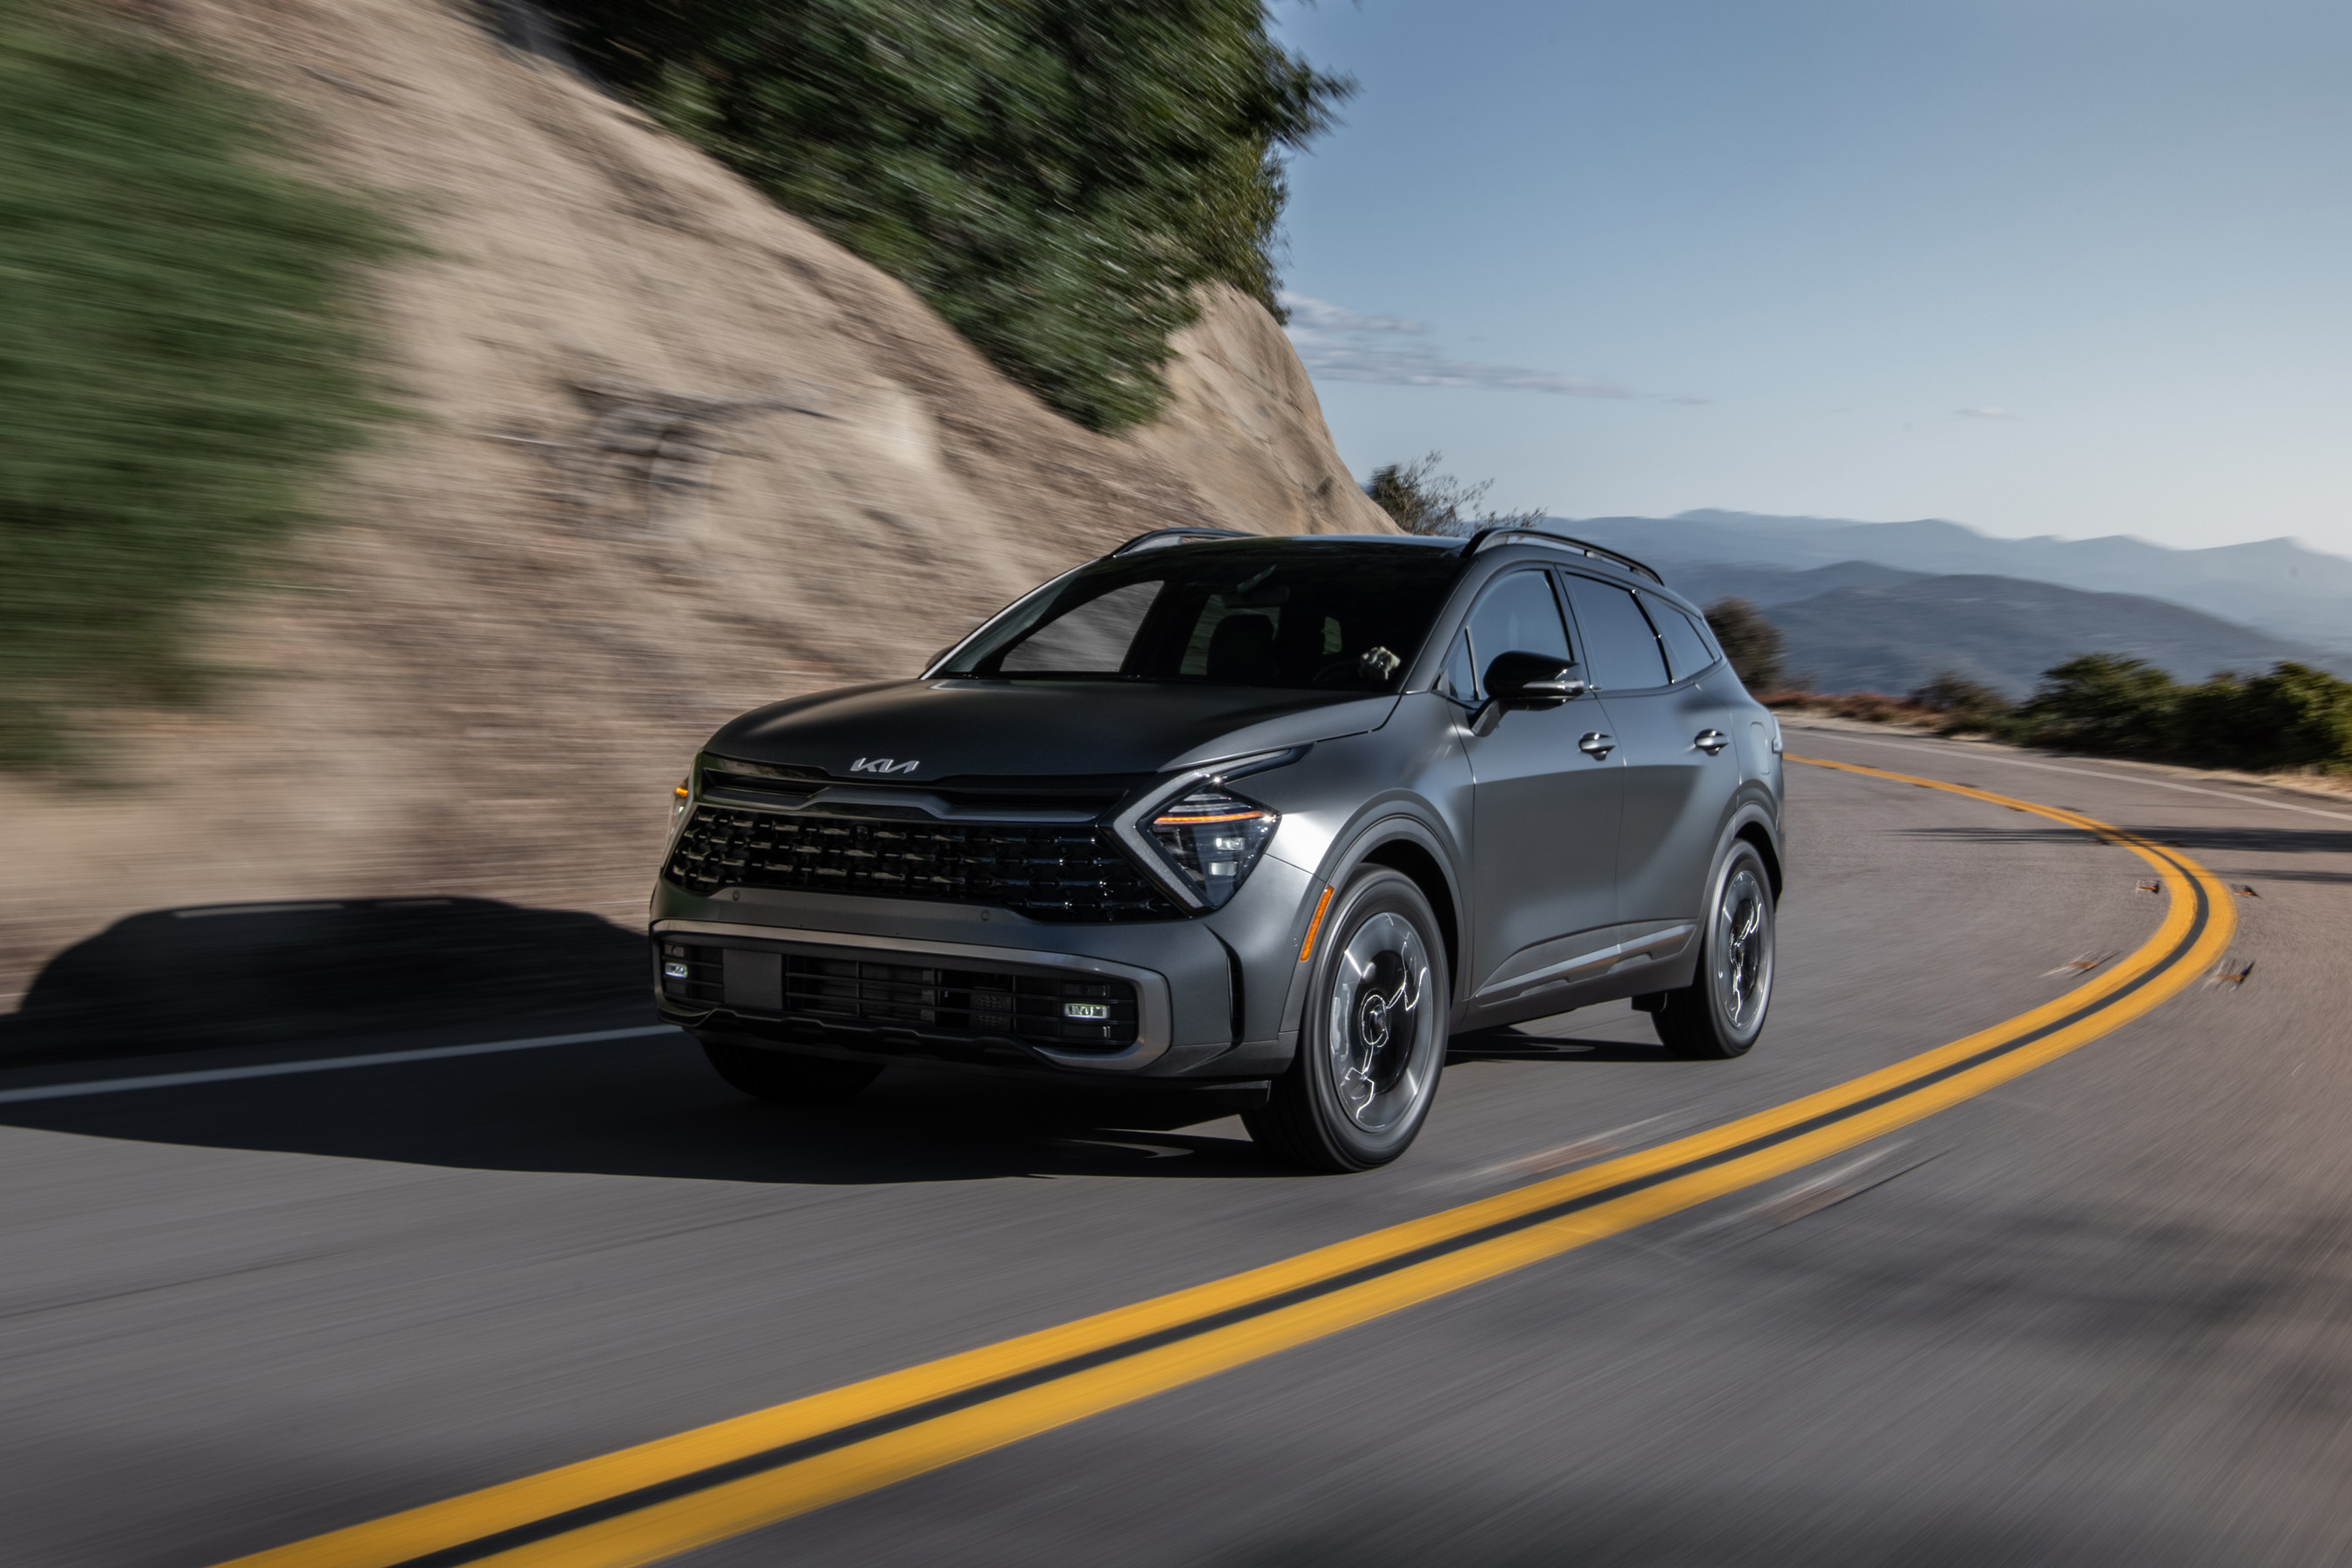 All-new 2023 Sportage PHEV expands the breadth of Kia’s electrified SUV lineup.